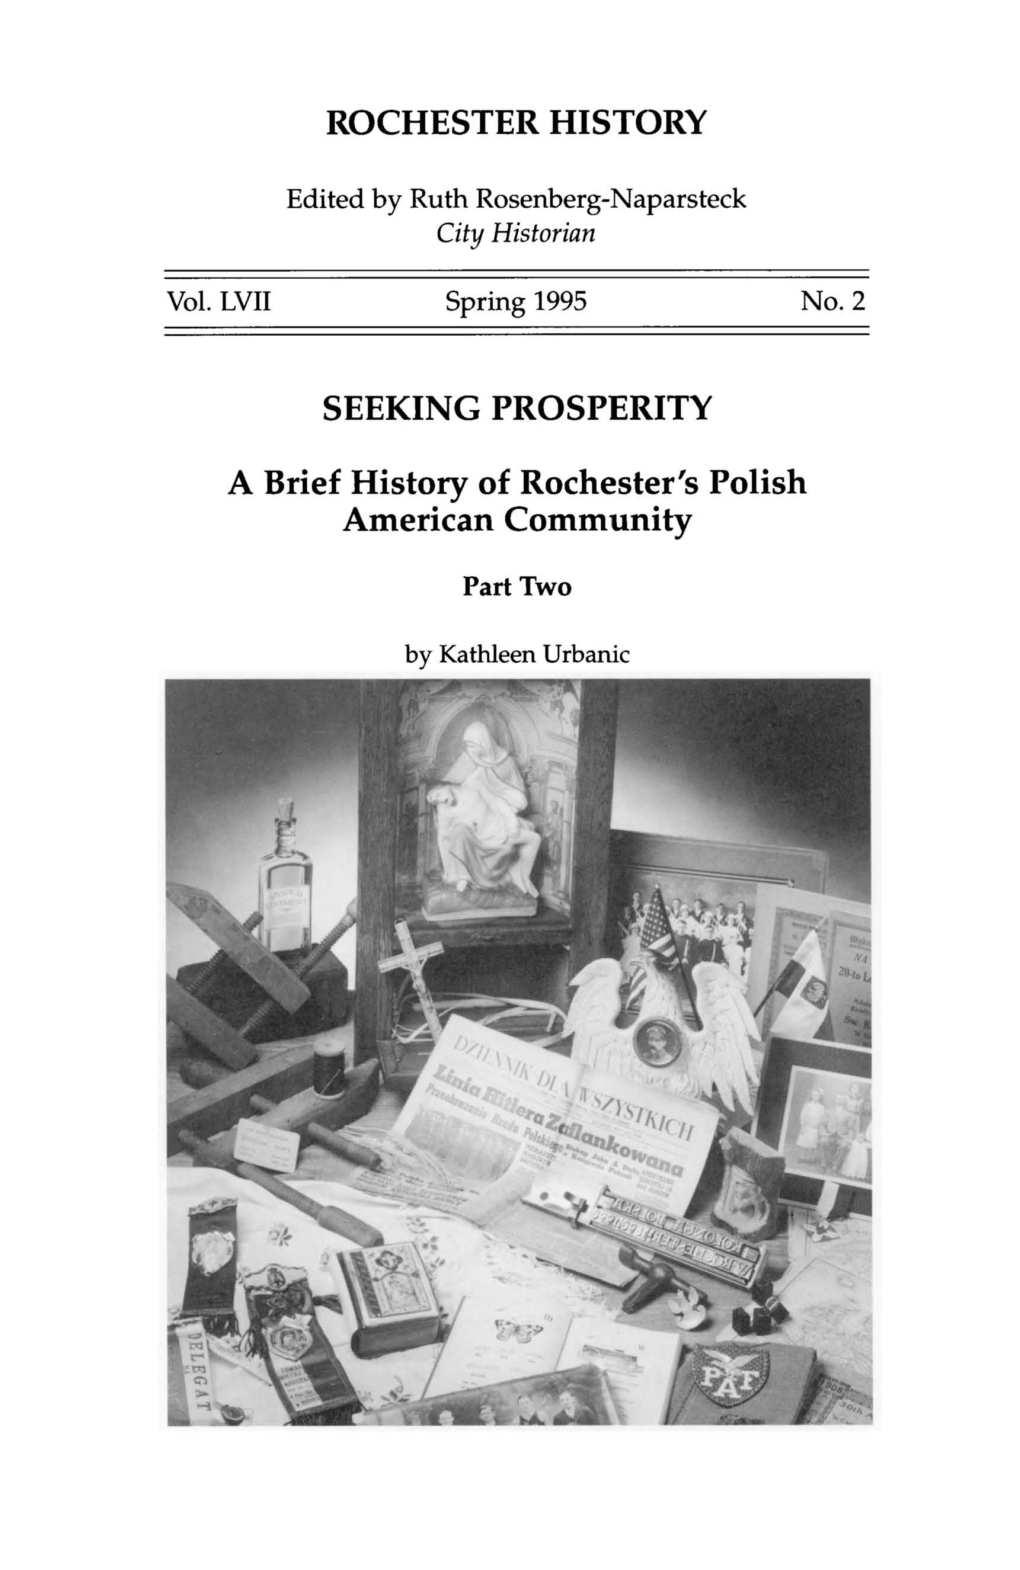 A Brief History of Rochester's Polish American Community